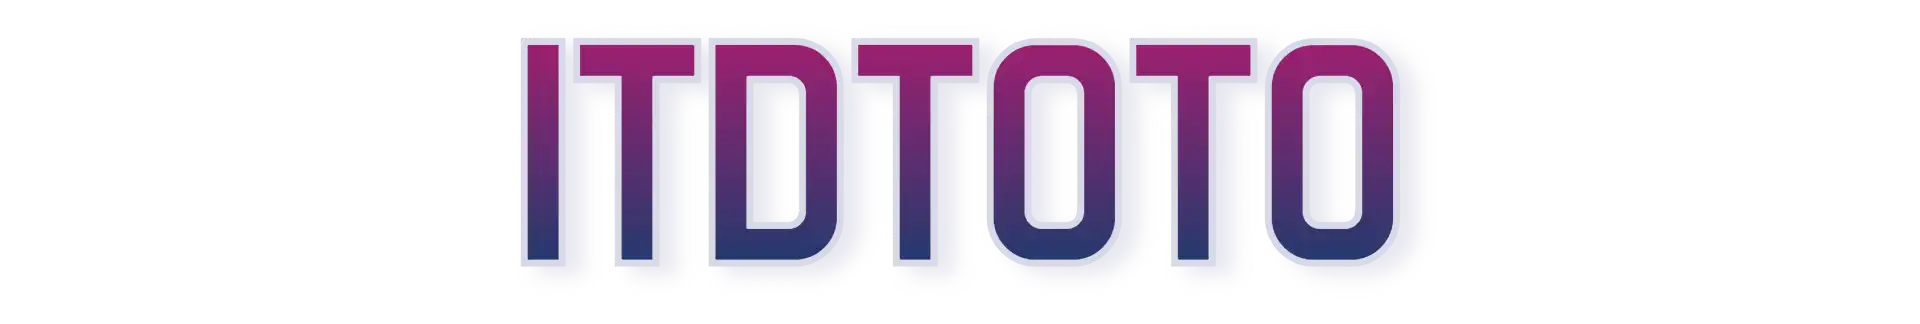 ItdToto